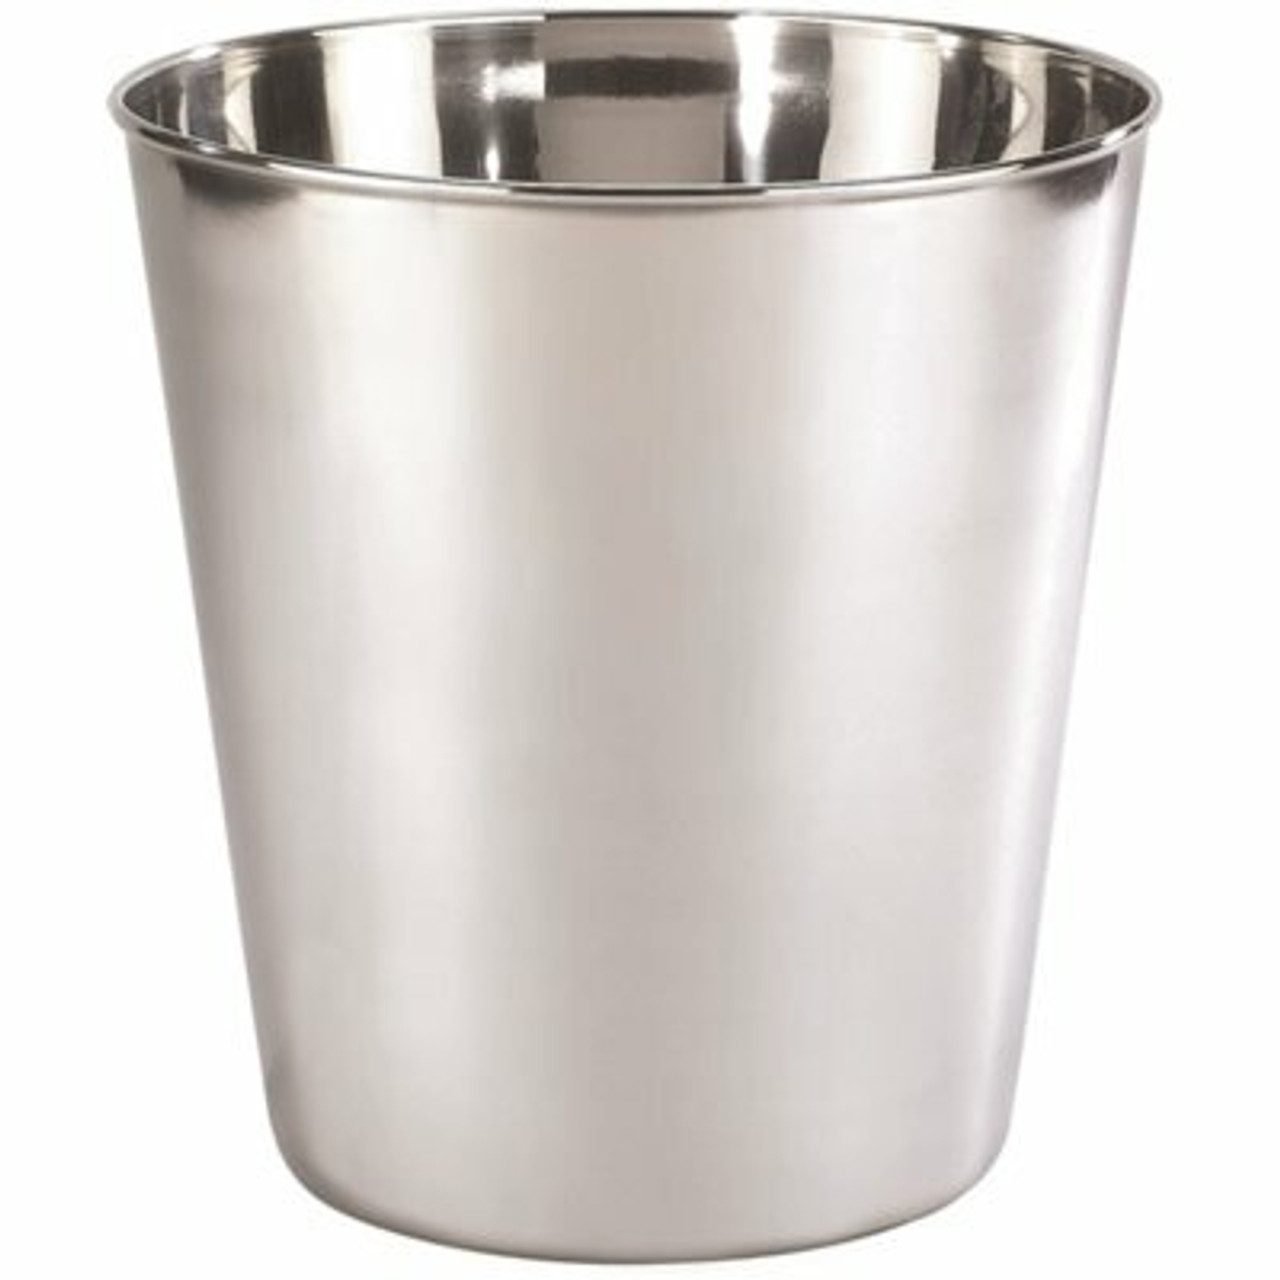 Basic 9 Qt. Wastebasket In Stainless Steel